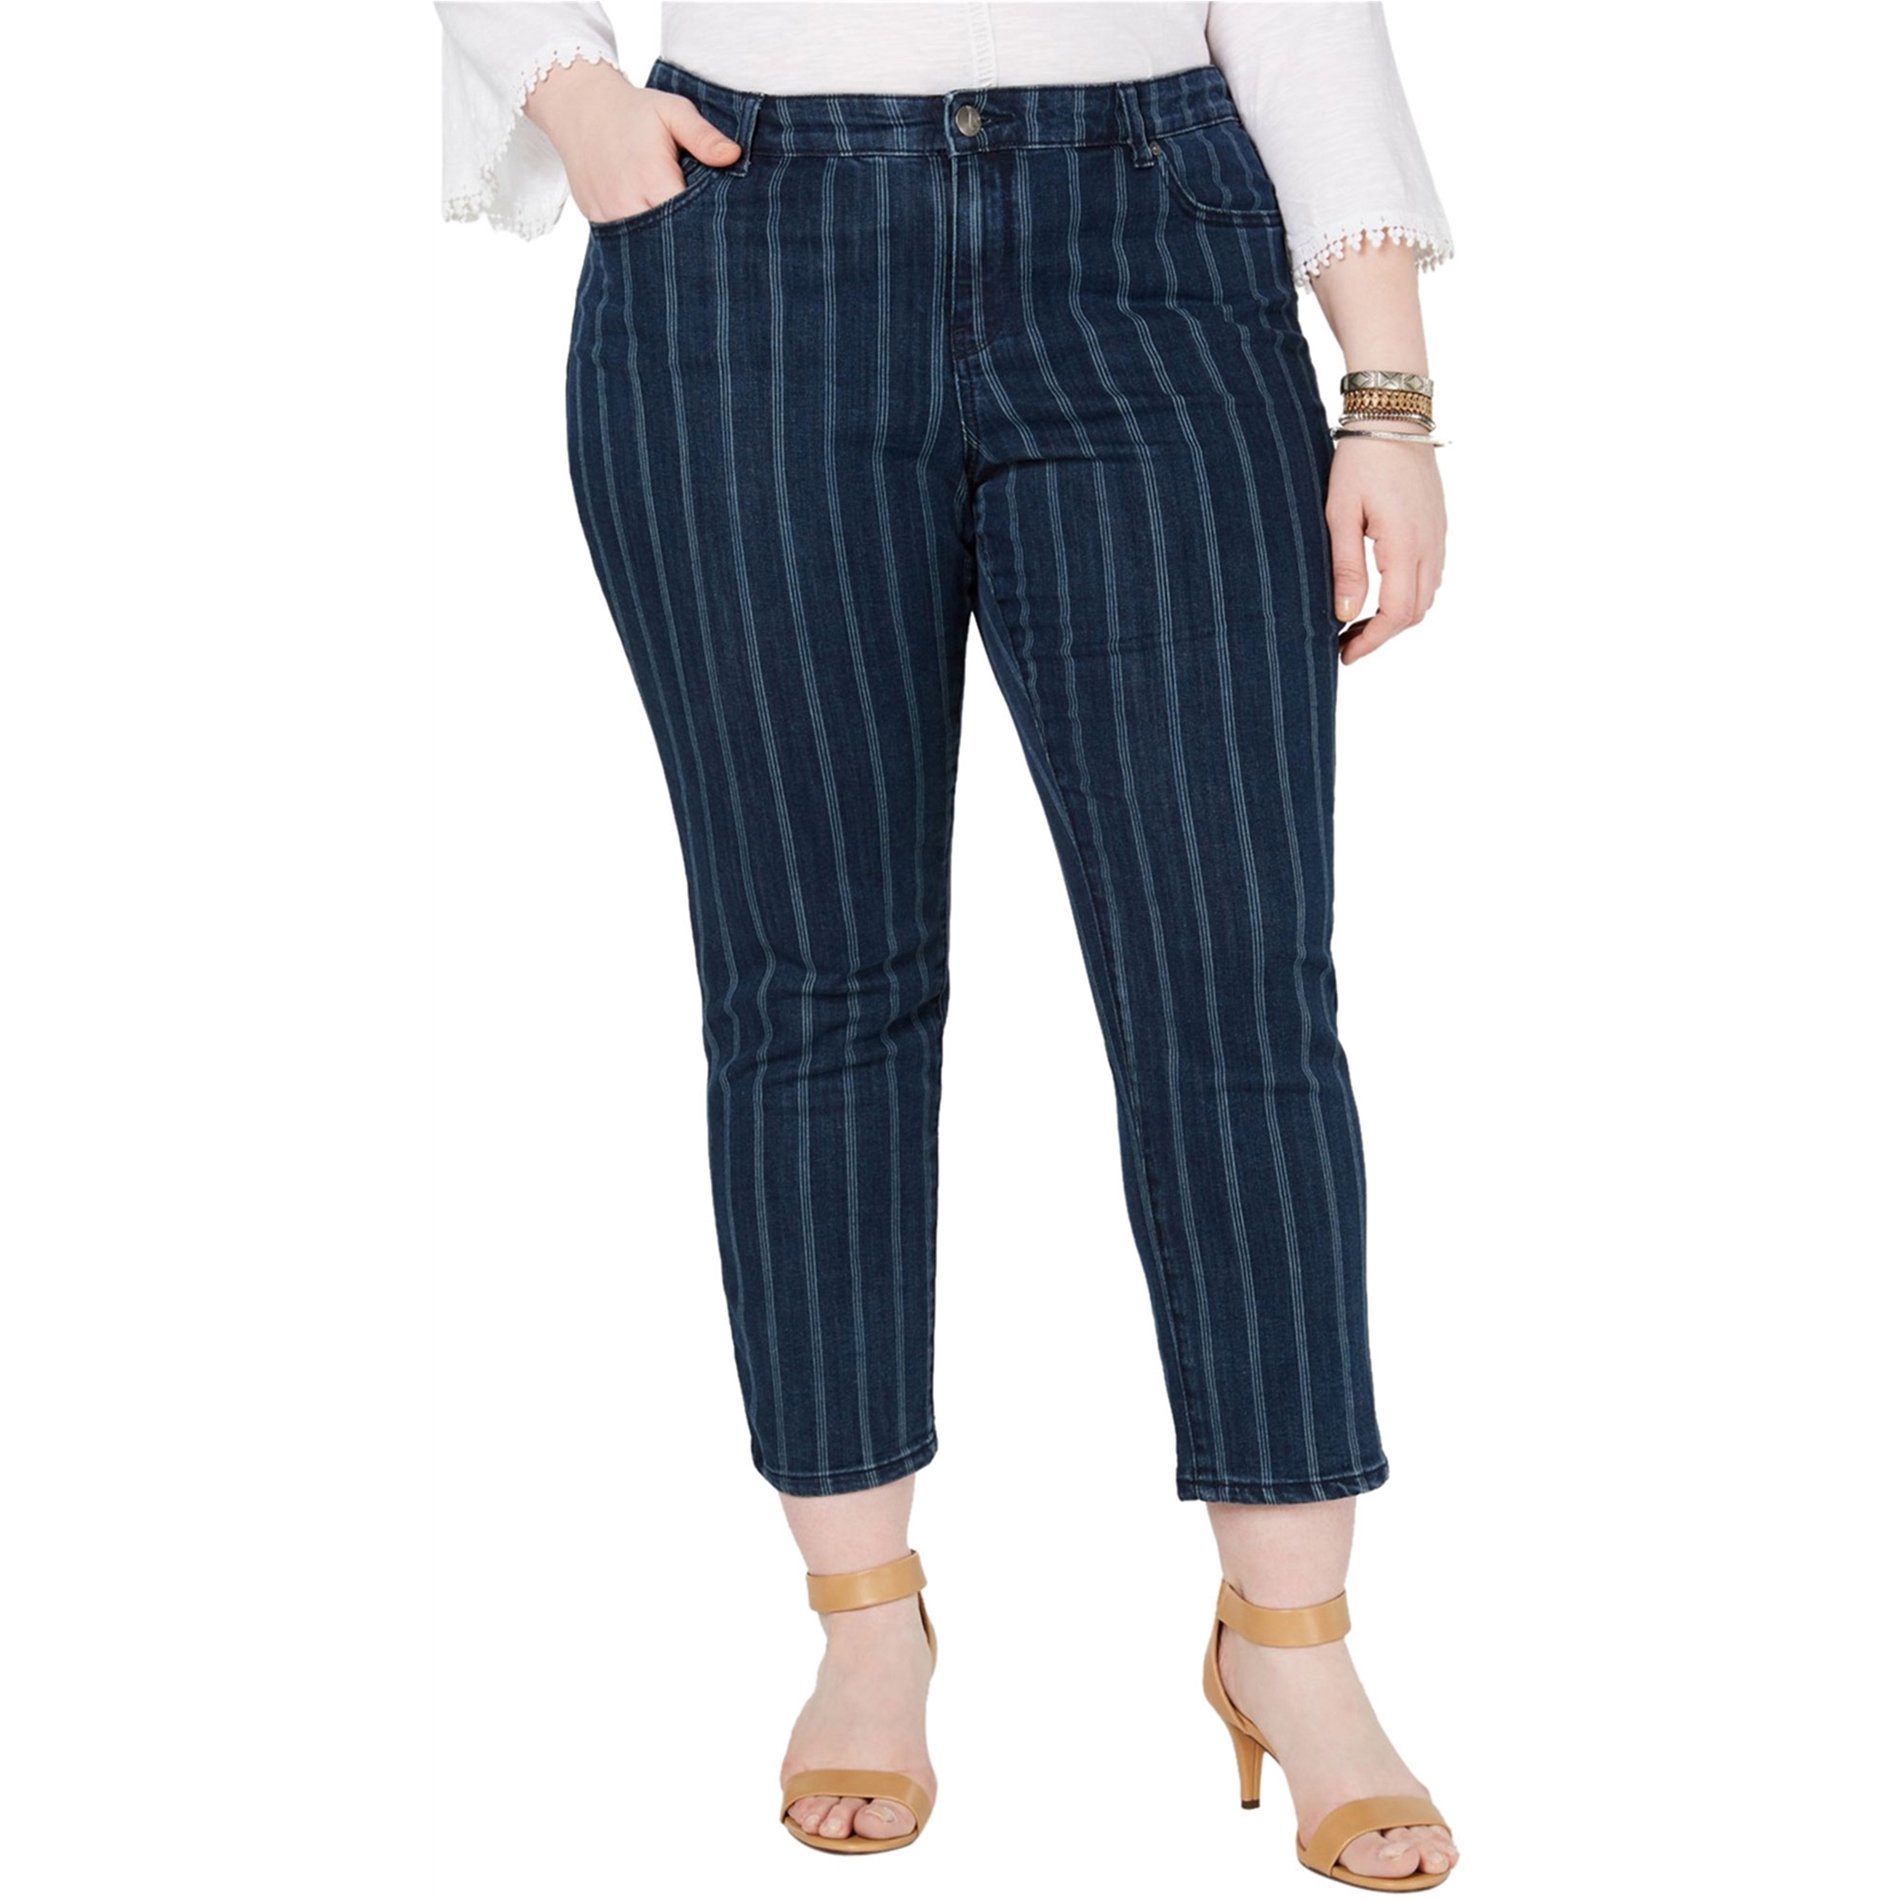 Style & Co. Womens Striped Ankle Slim Fit Jeans